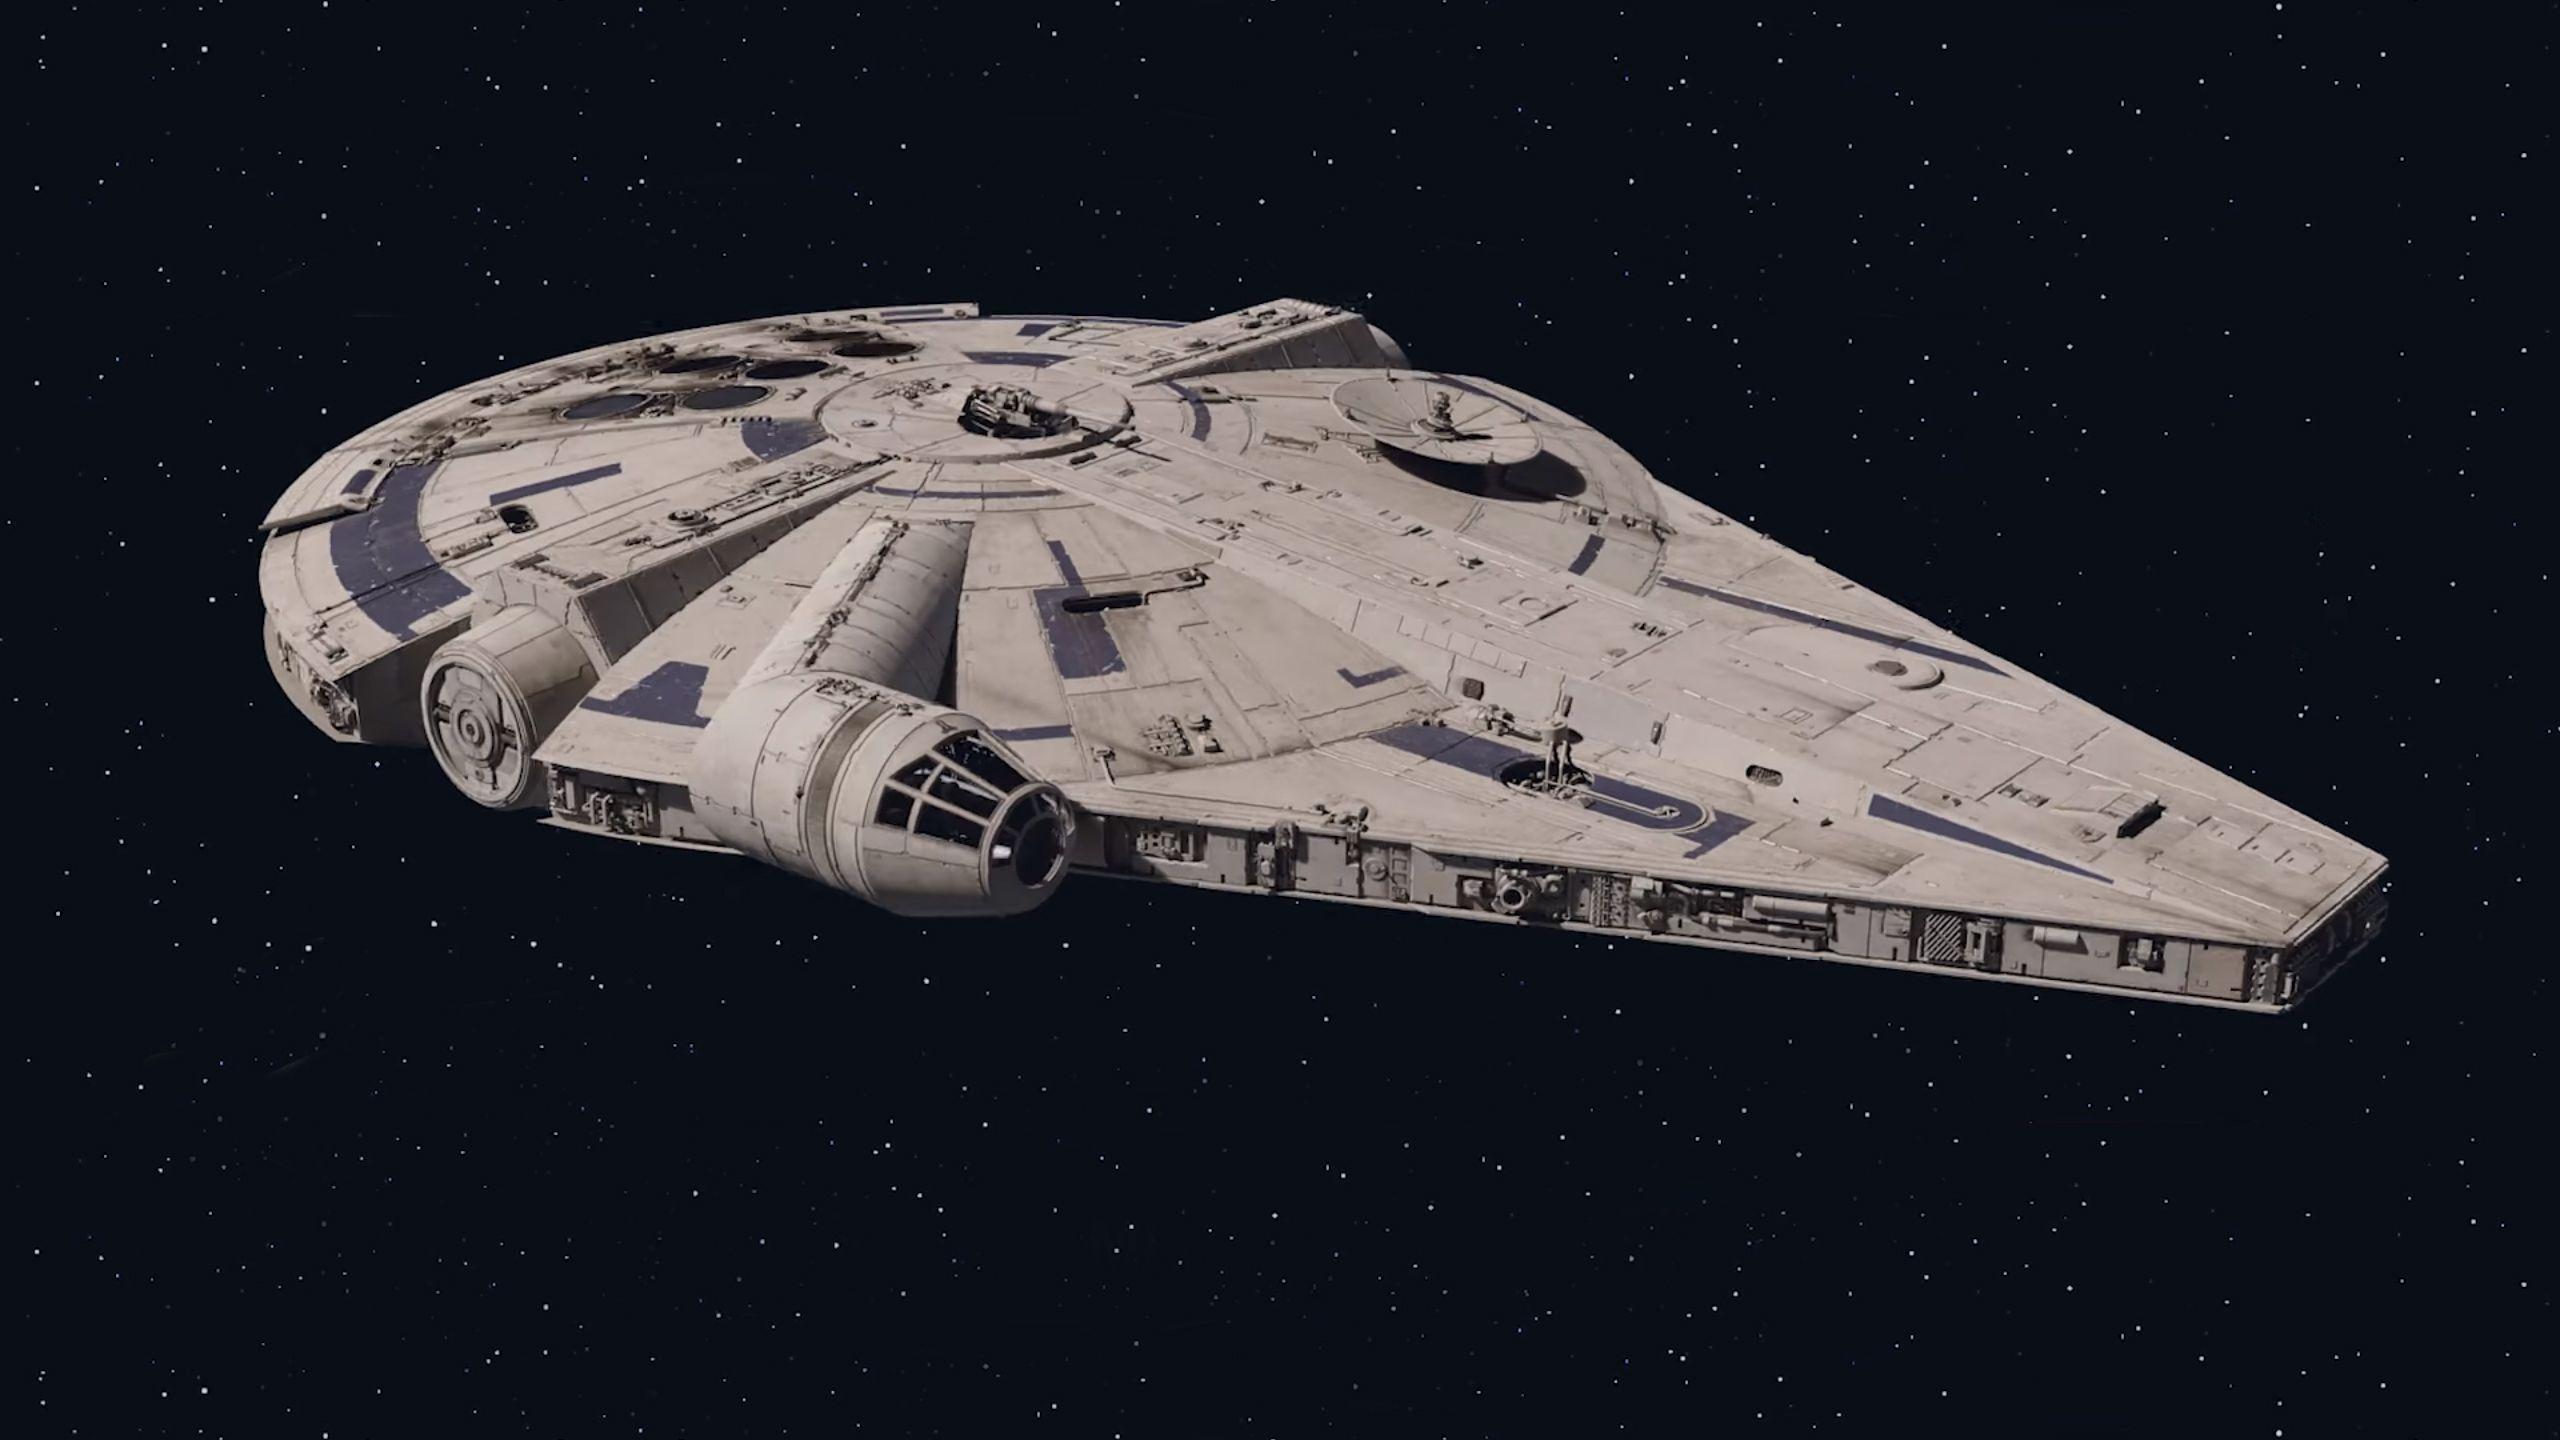 Why the Millennium Falcon Looks Different in Solo: A Star Wars Story